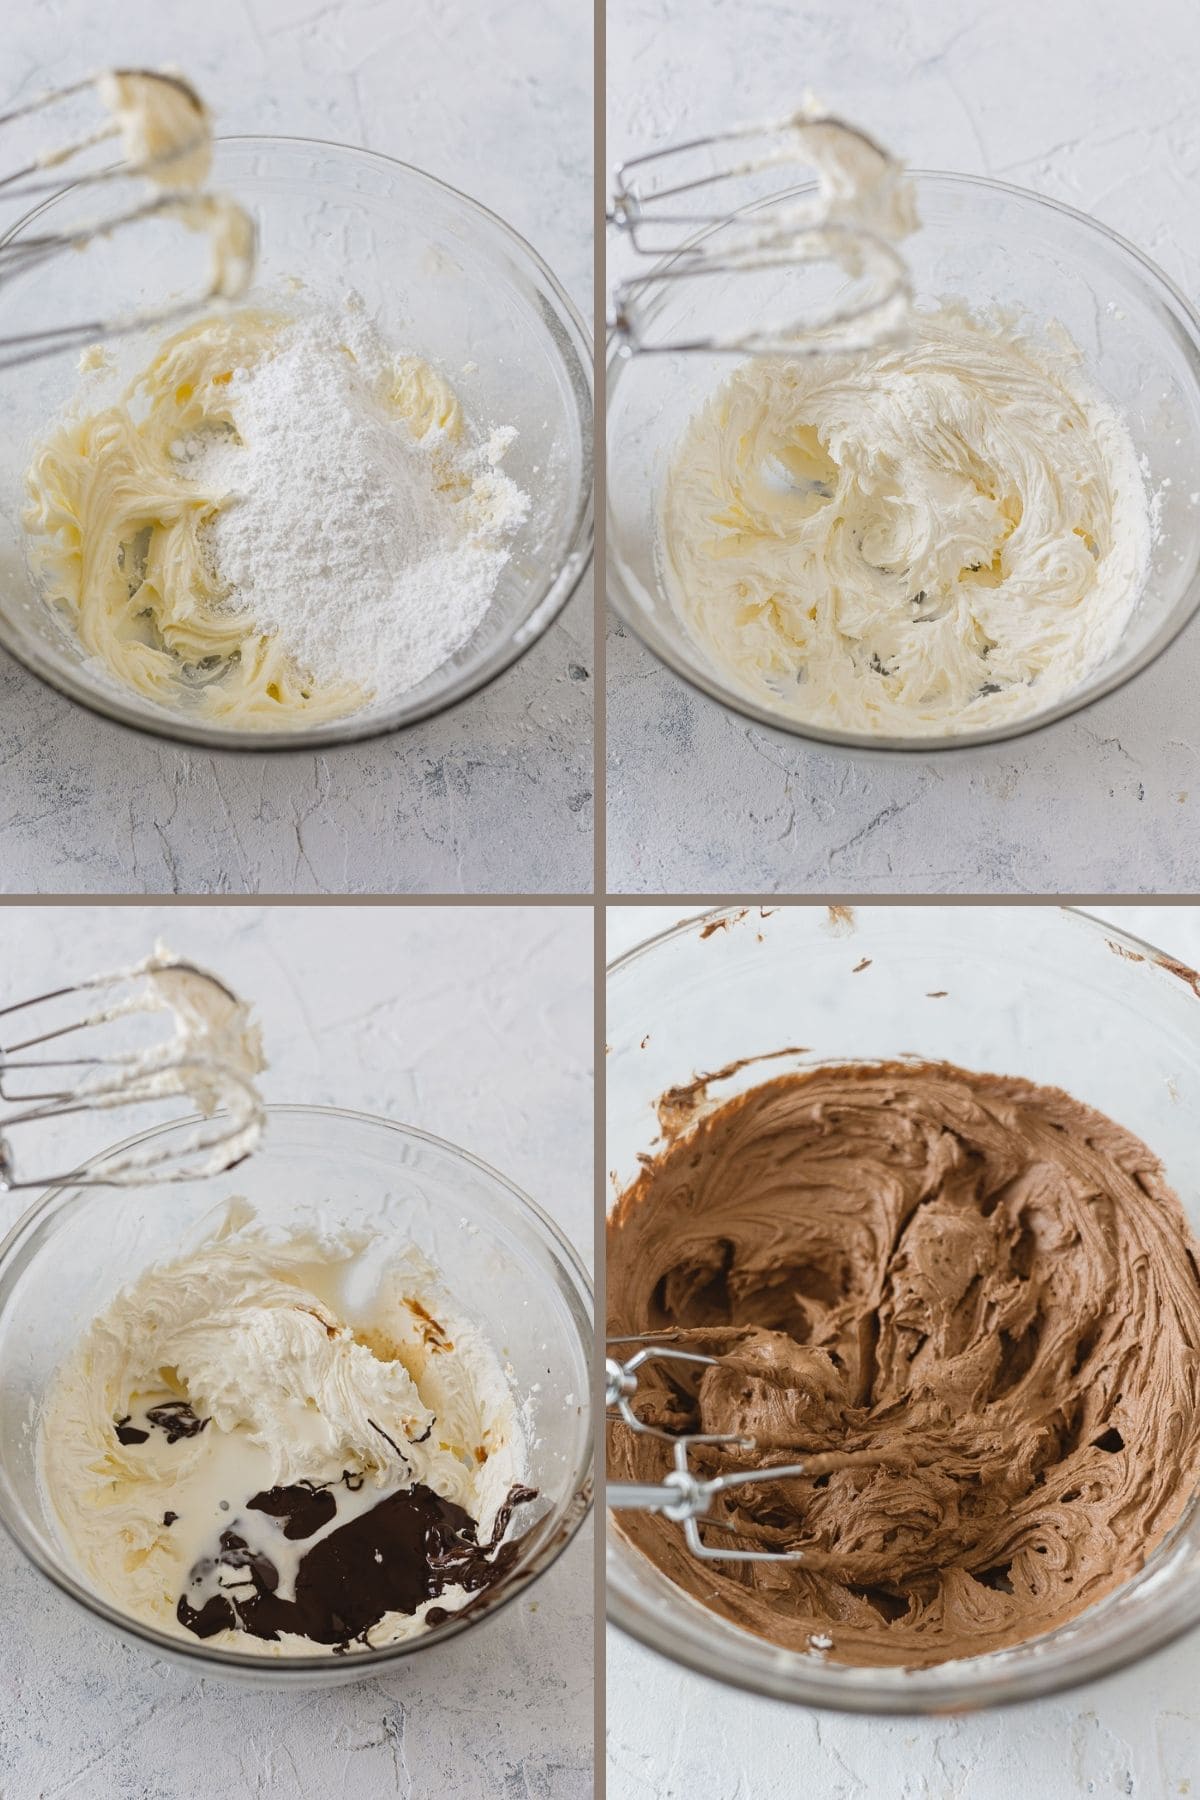 Step by step images of how to make chocolate buttercream with butter, sugar, and melted chocolate.